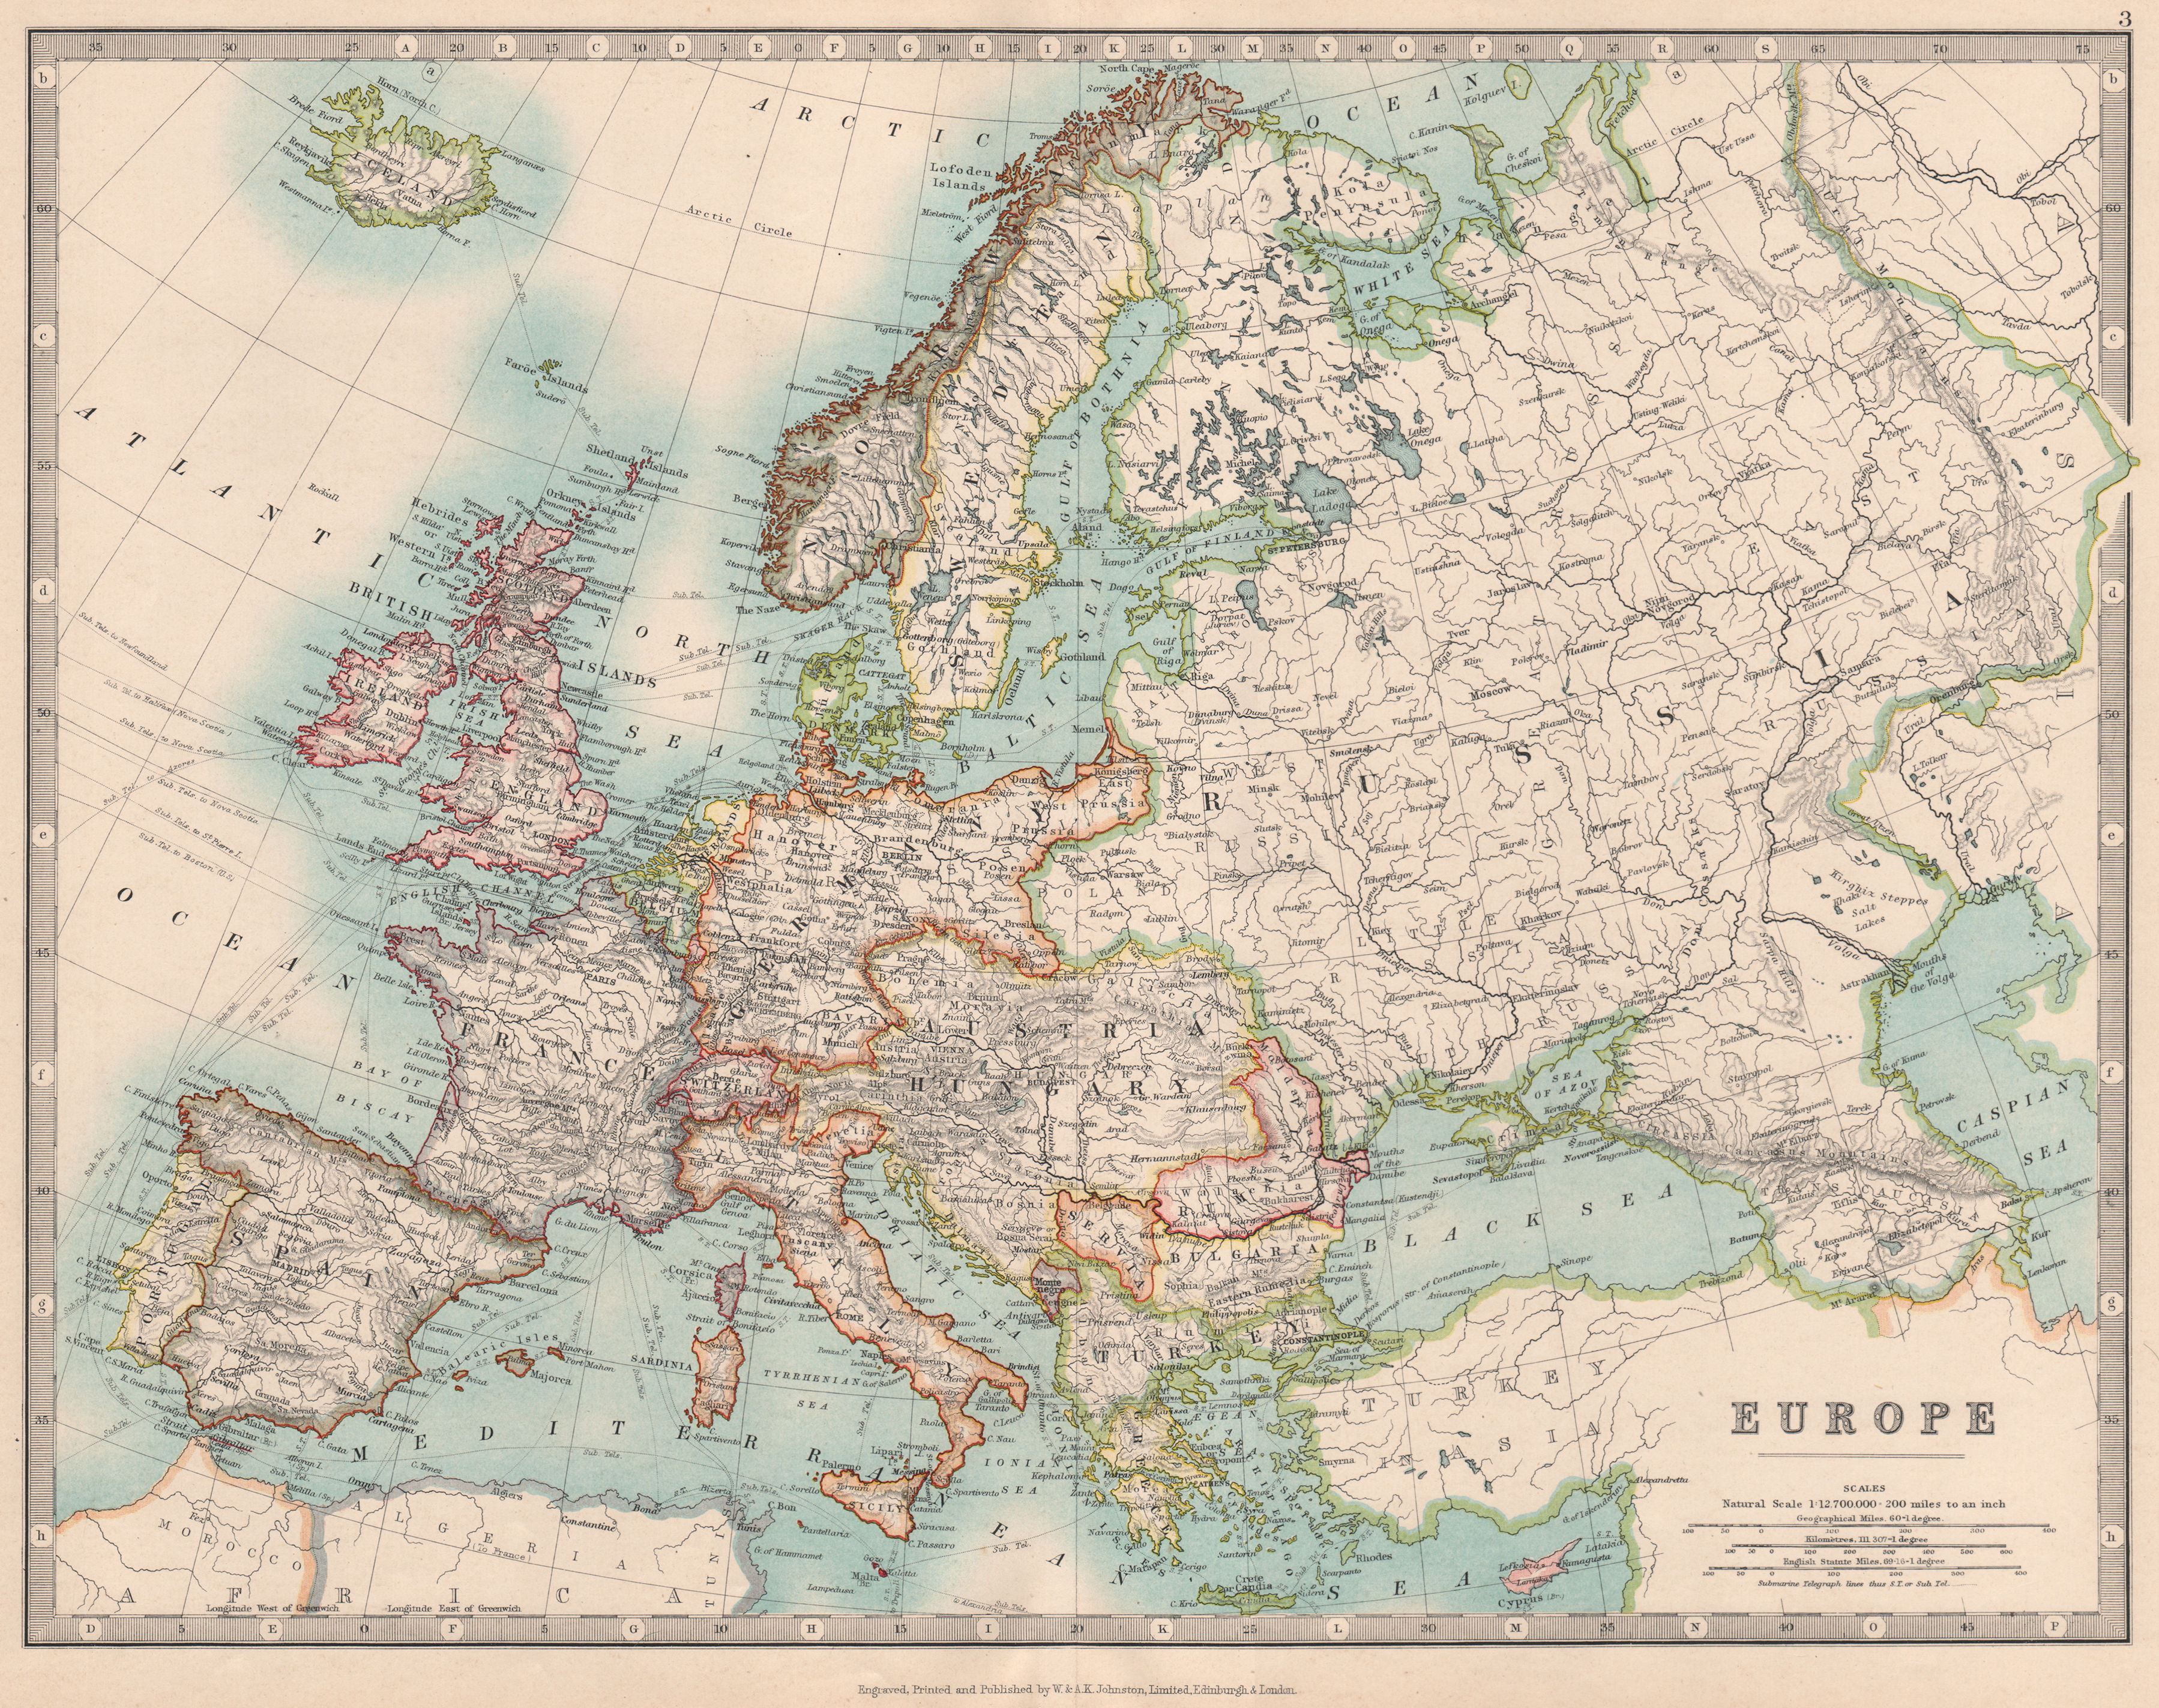 Associate Product EUROPE shown just before the First World War. JOHNSTON 1912 old antique map